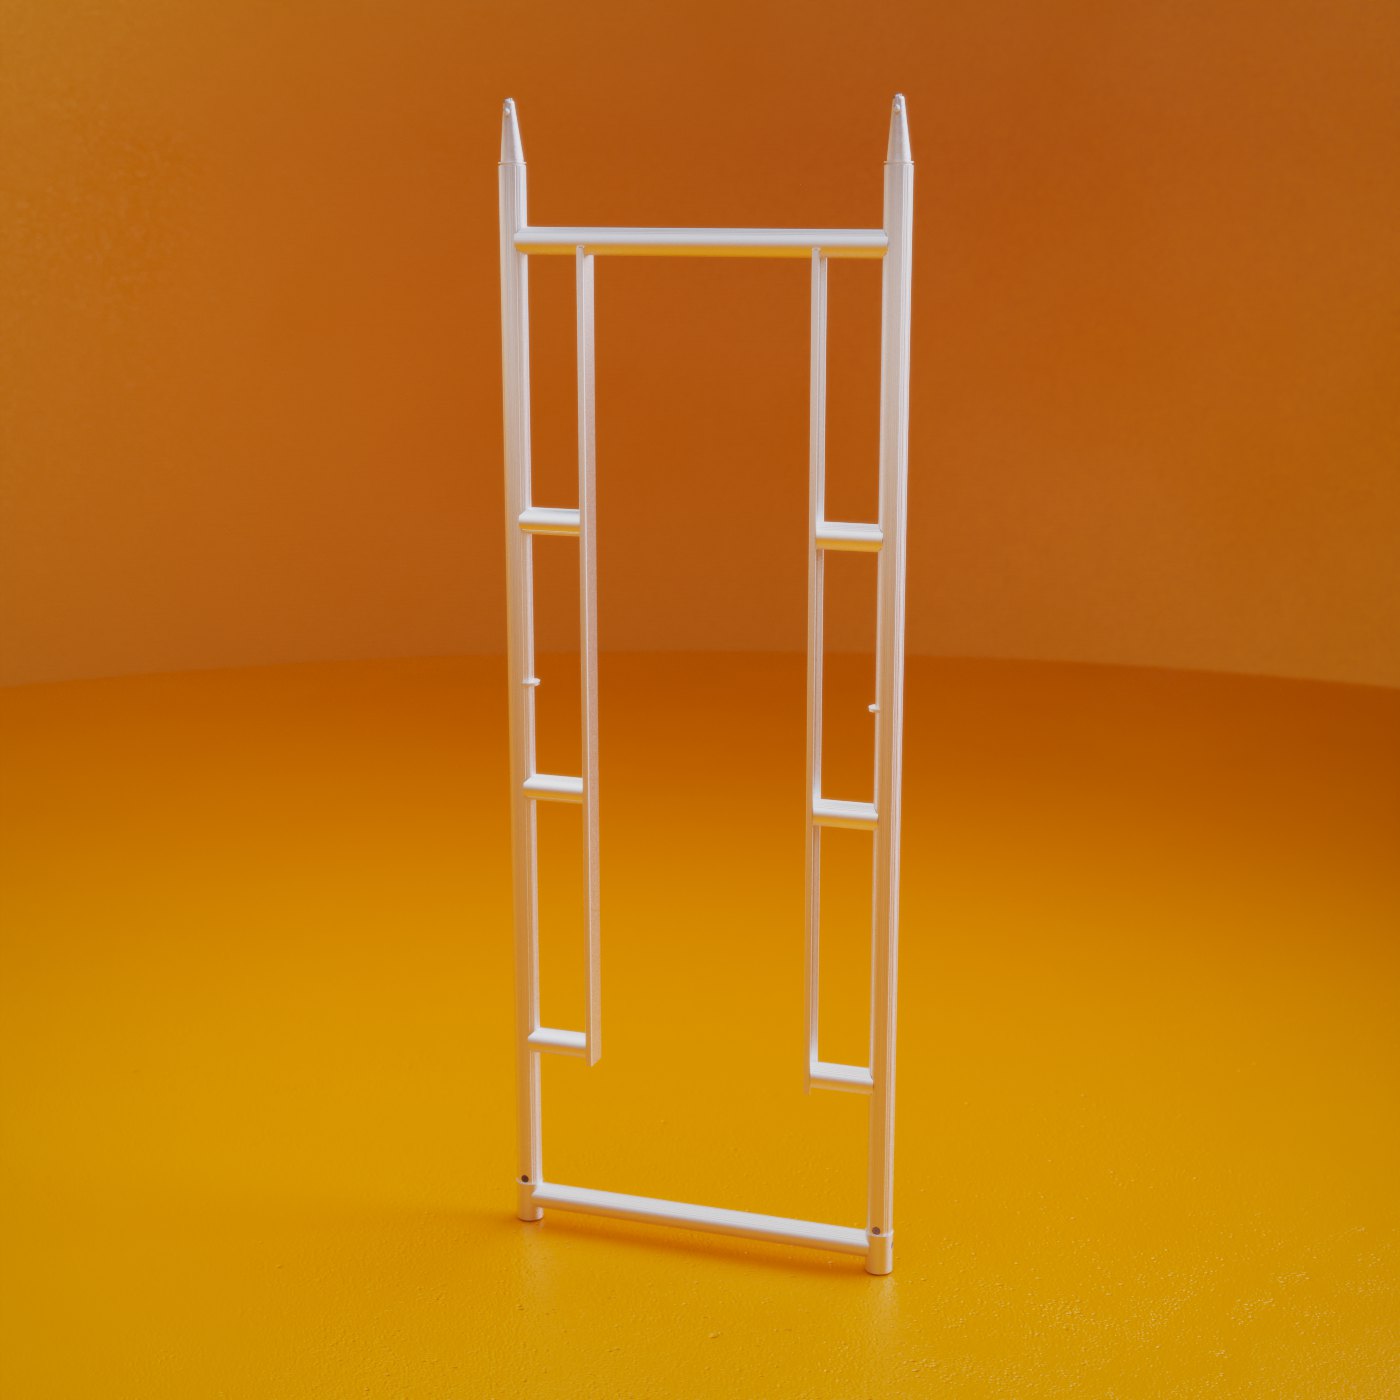 An image of the walkthrough frame from the Alto Staiwell Pro Tower in a photo studio.